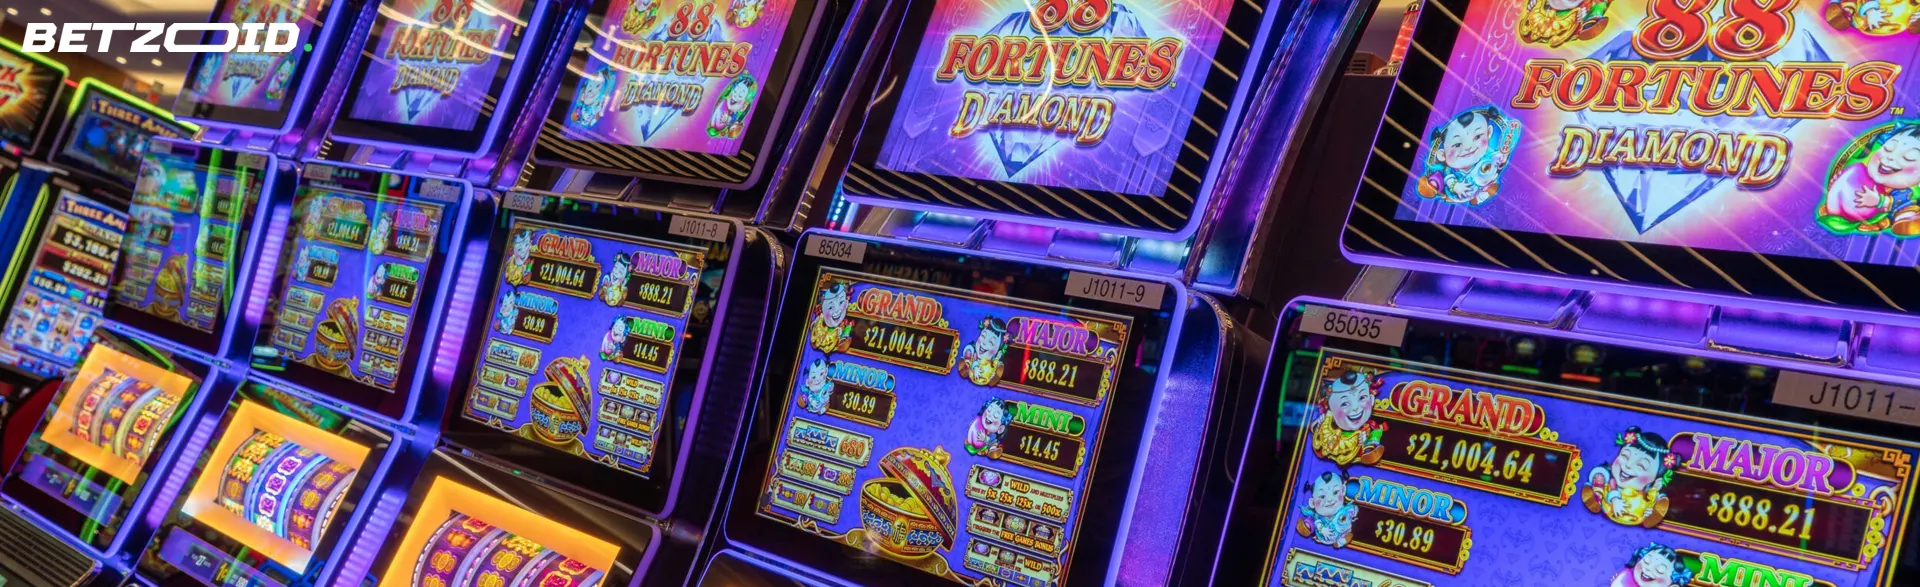 Array of brightly lit slot machines in a casino, each promoting free spins, indicative of the generous offers available at casinos in Canada with no wagering requirements.